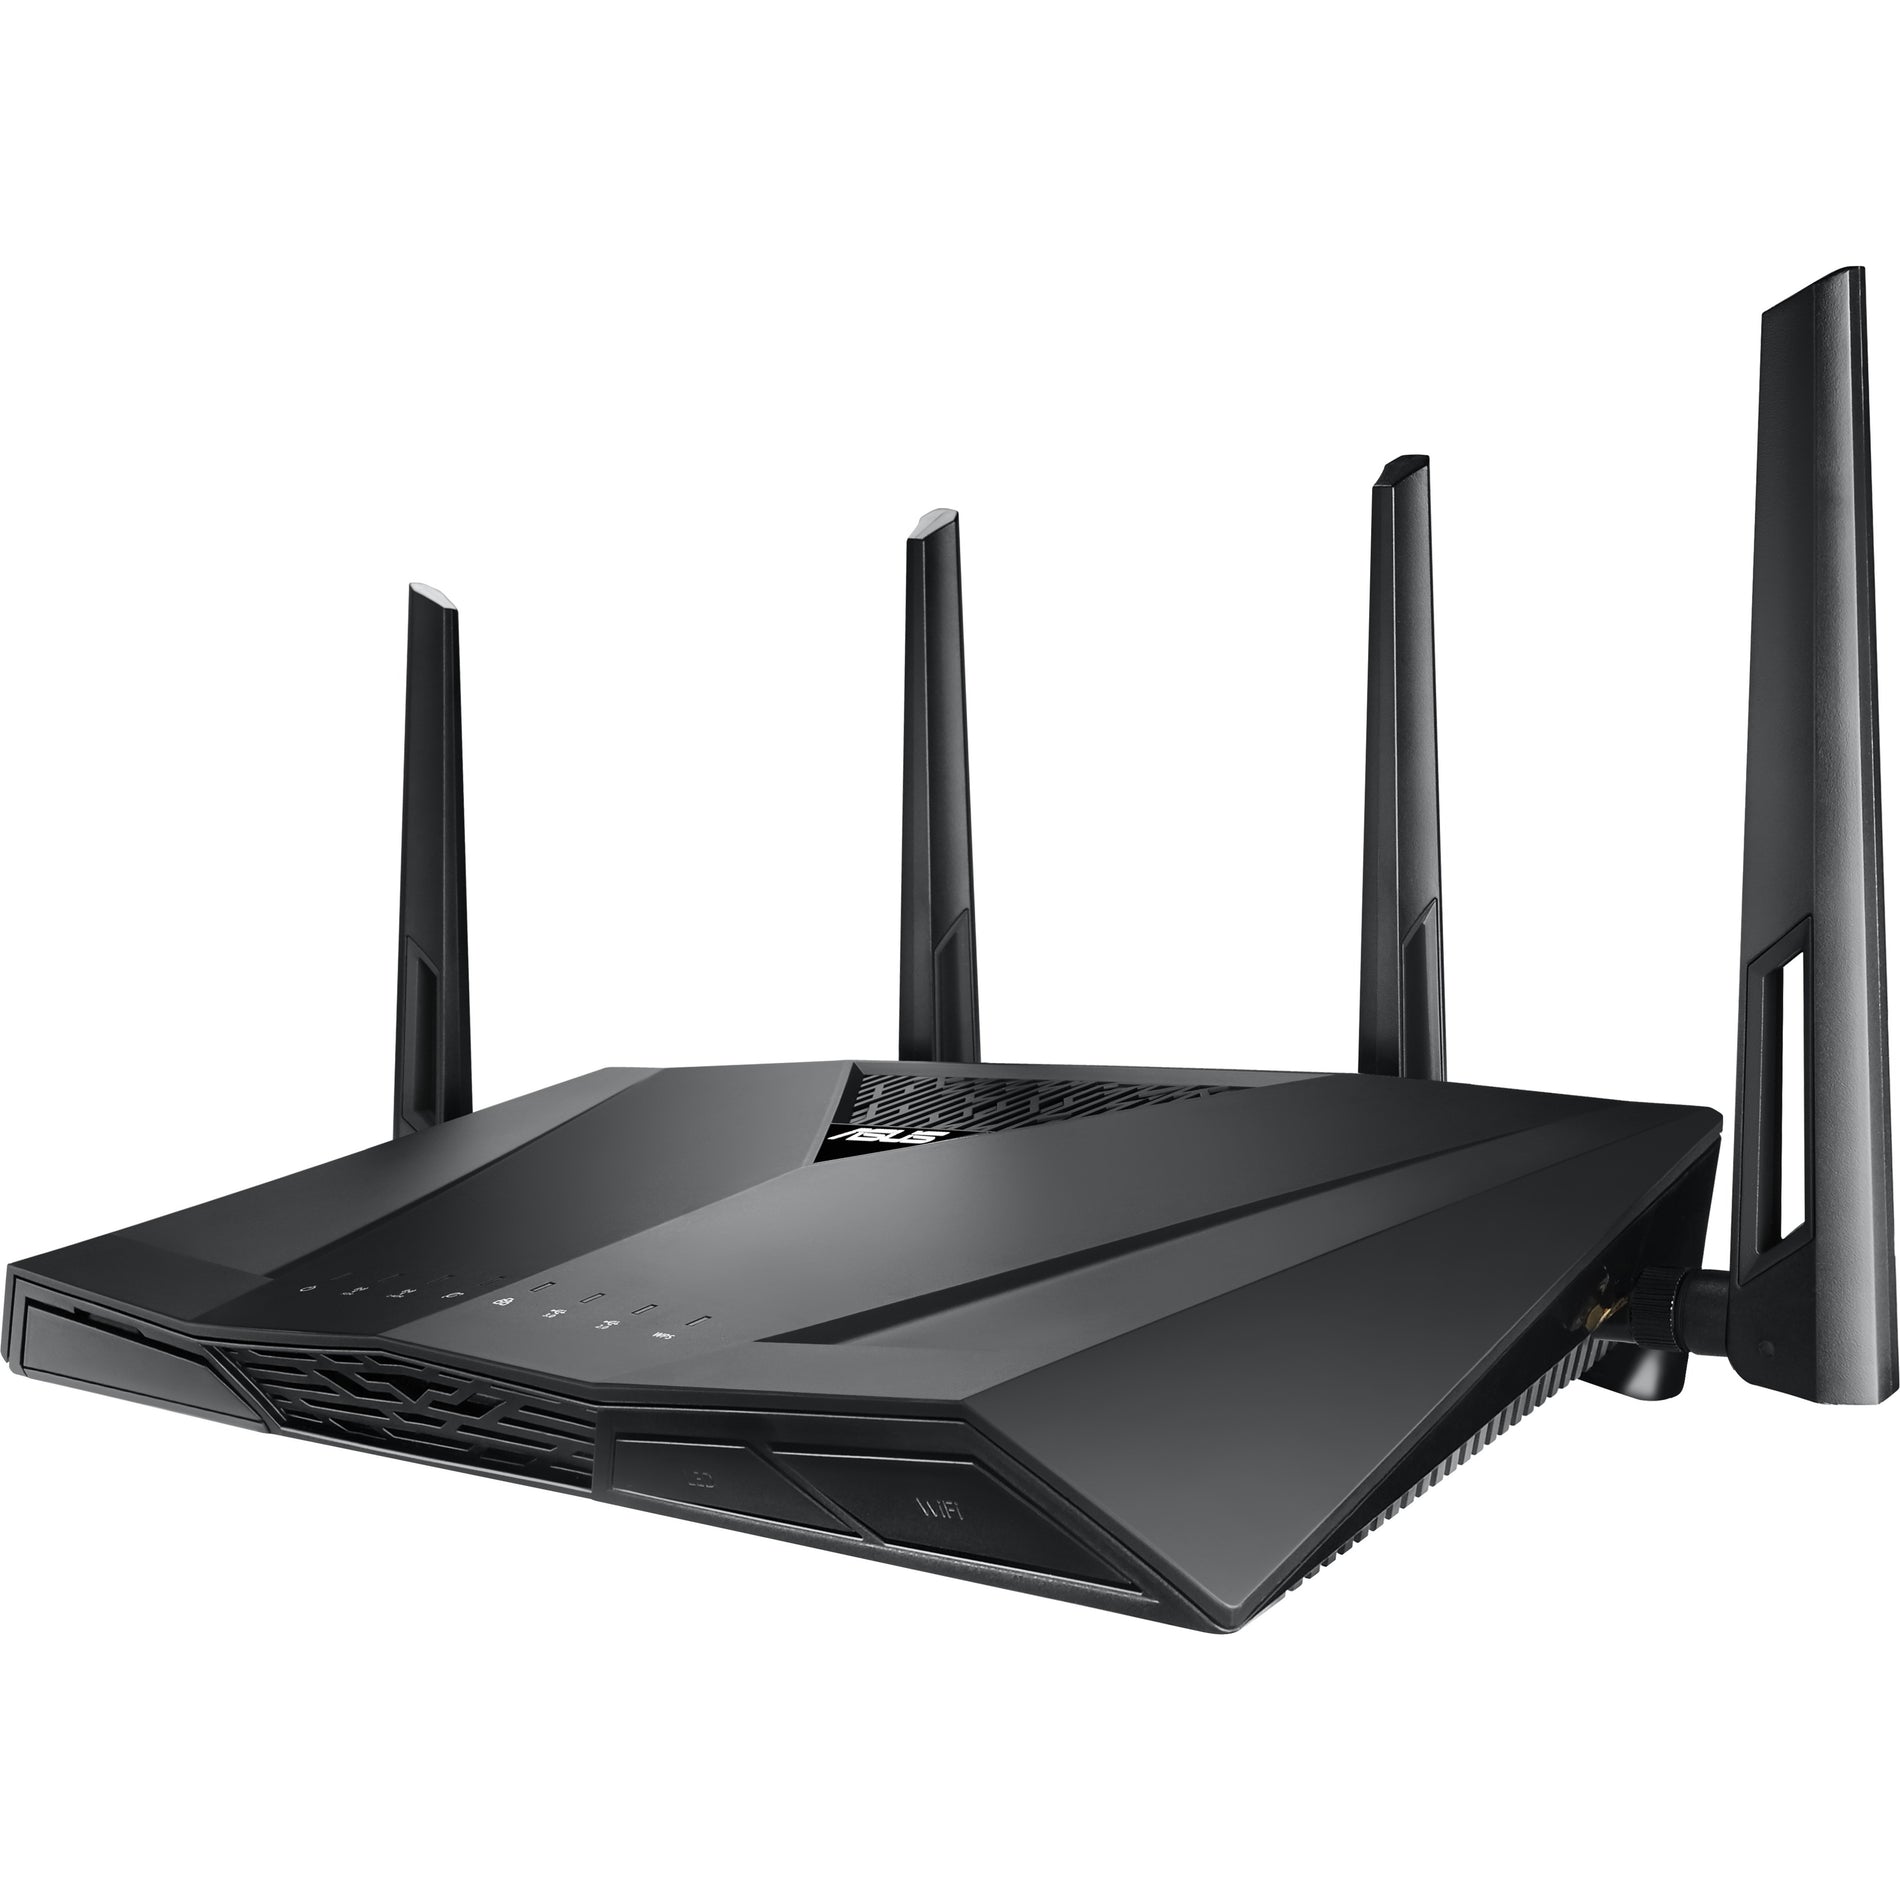 Asus RT-AC3100 Dual-band Wireless-AC3100 Gigabit Router, Wi-Fi 5, 387.50 MB/s